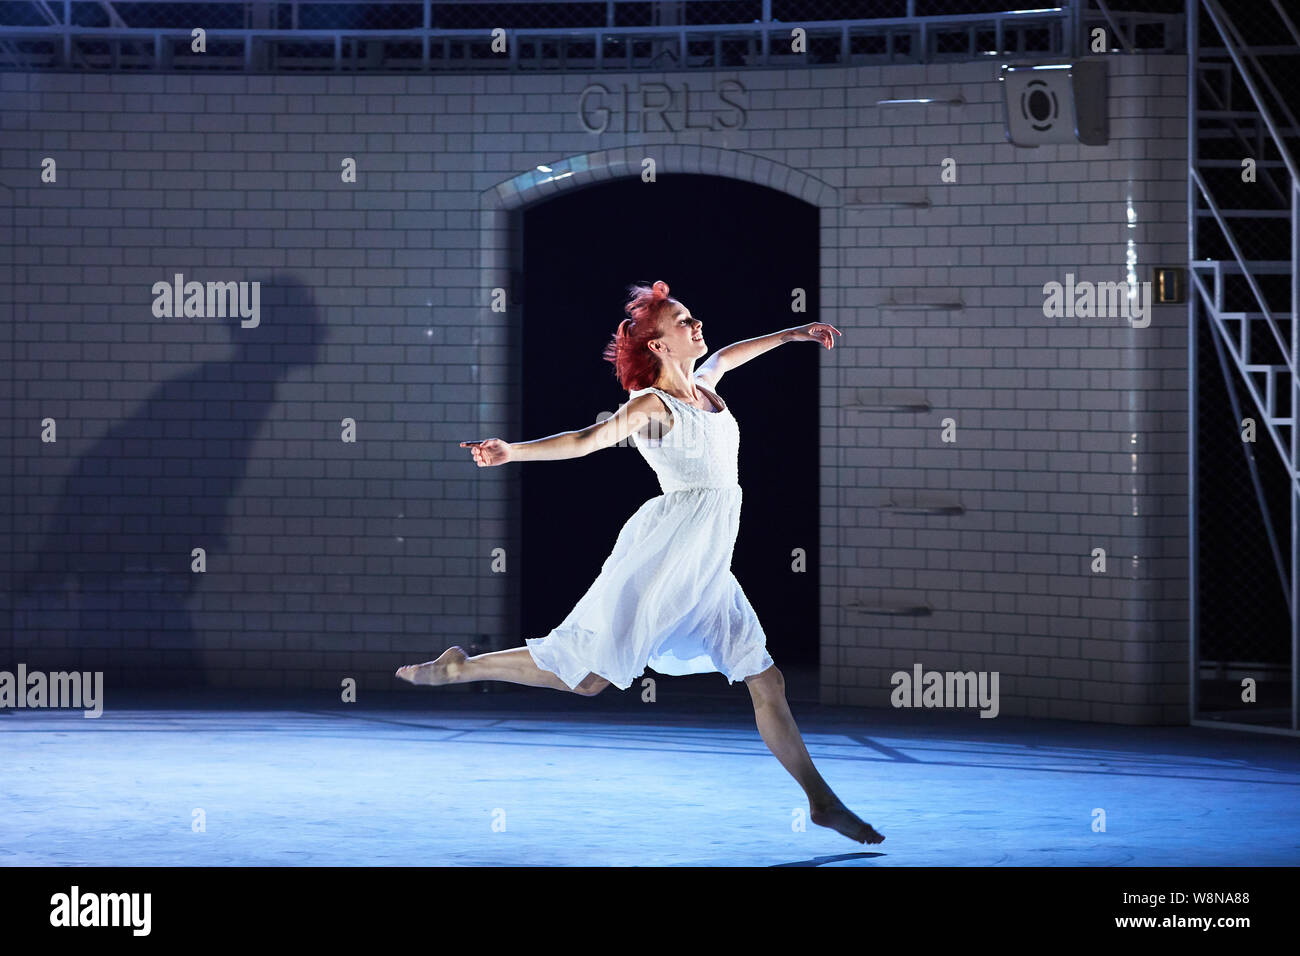 Matthew Bourne's 'Romeo And Juliet' At Sadler's Wells LONDON, ENGLAND - AUGUST 2019: Paris Fitzpatrick as Romeo,  Cordelia Braithwaite as Juliet, Dan Wright as Tybalt, Jackson Fisch as Balthasar, Reece Causton as Mercutio and New Adventures company in Matthew Bourne's 'Romeo And Juliet' at Sadler's Wells Theatre on August 9, 2019 in London, England. (Photo by Ambra Vernuccio) Stock Photo